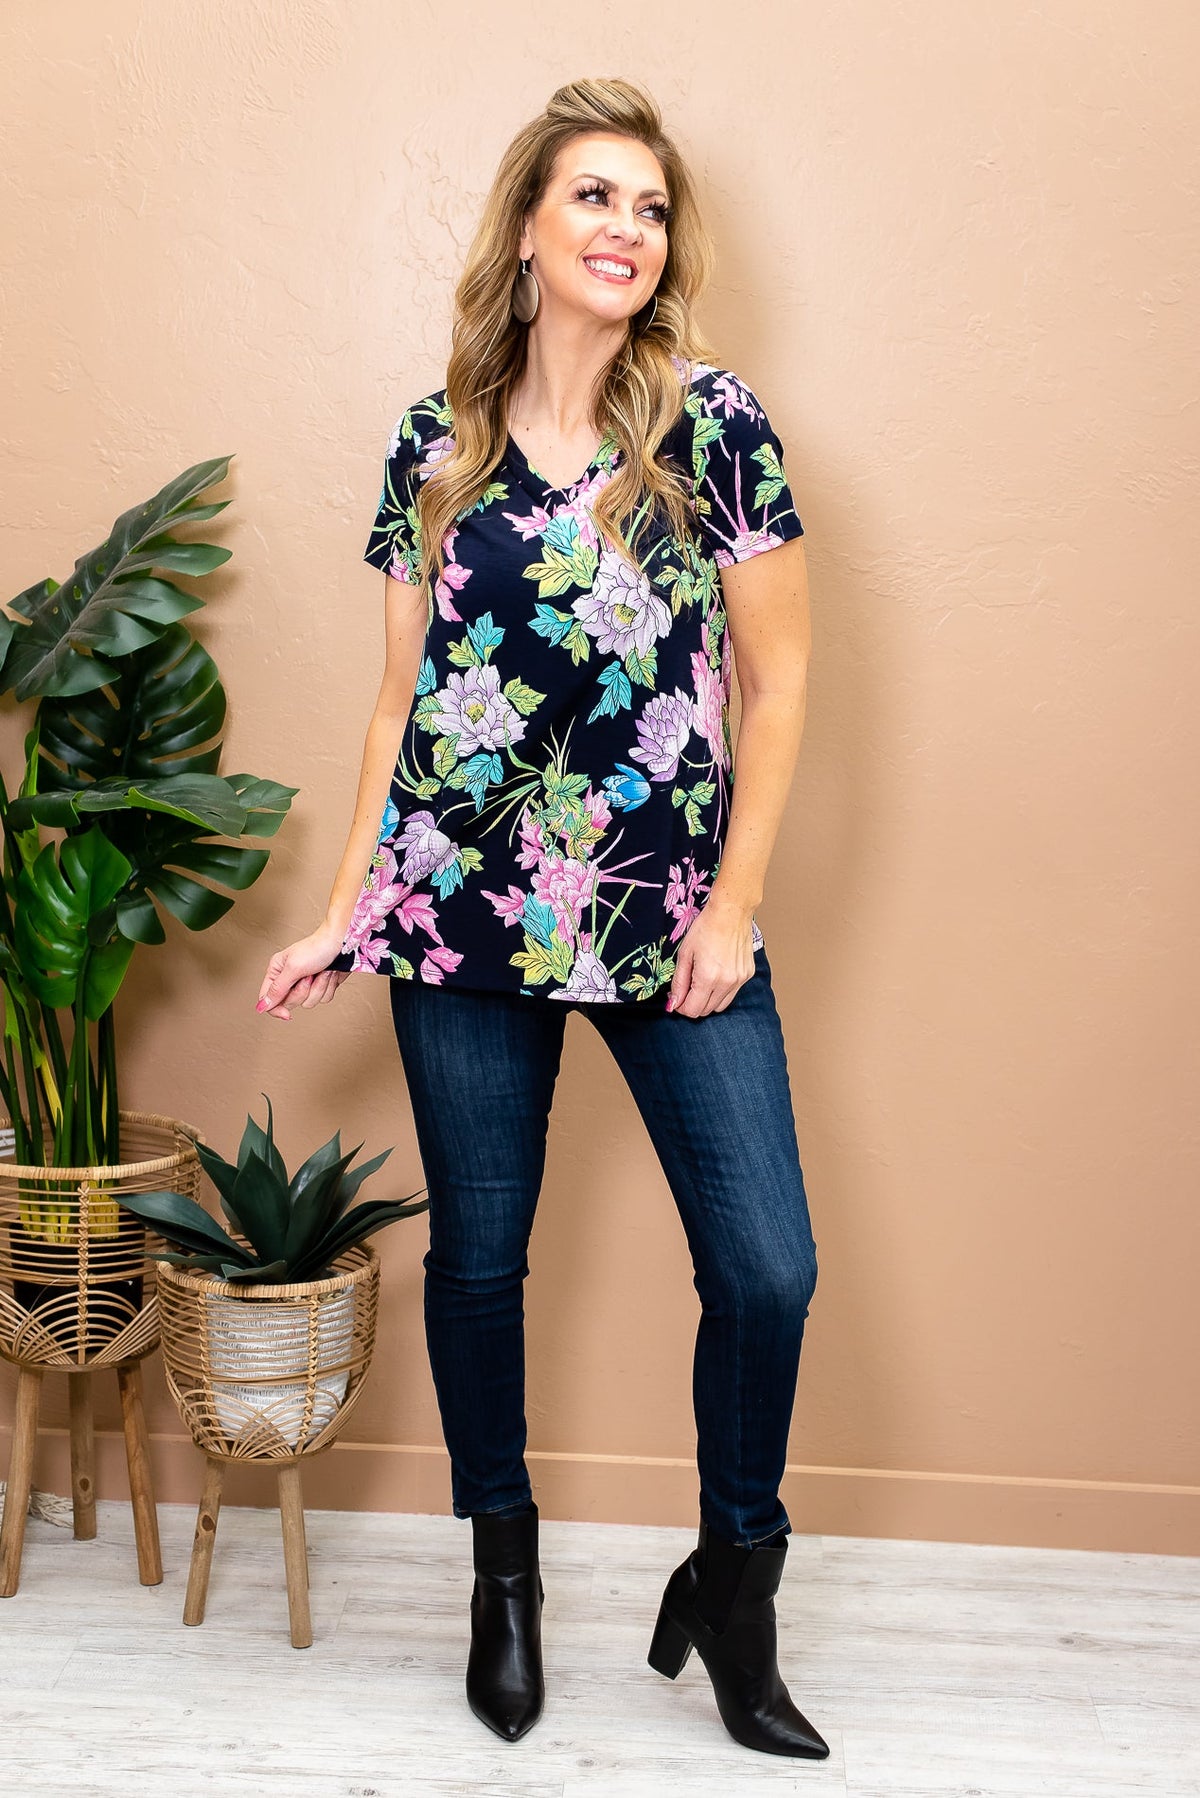 Watching The Days Go By Navy/Multi Color floral Top - T3208NV